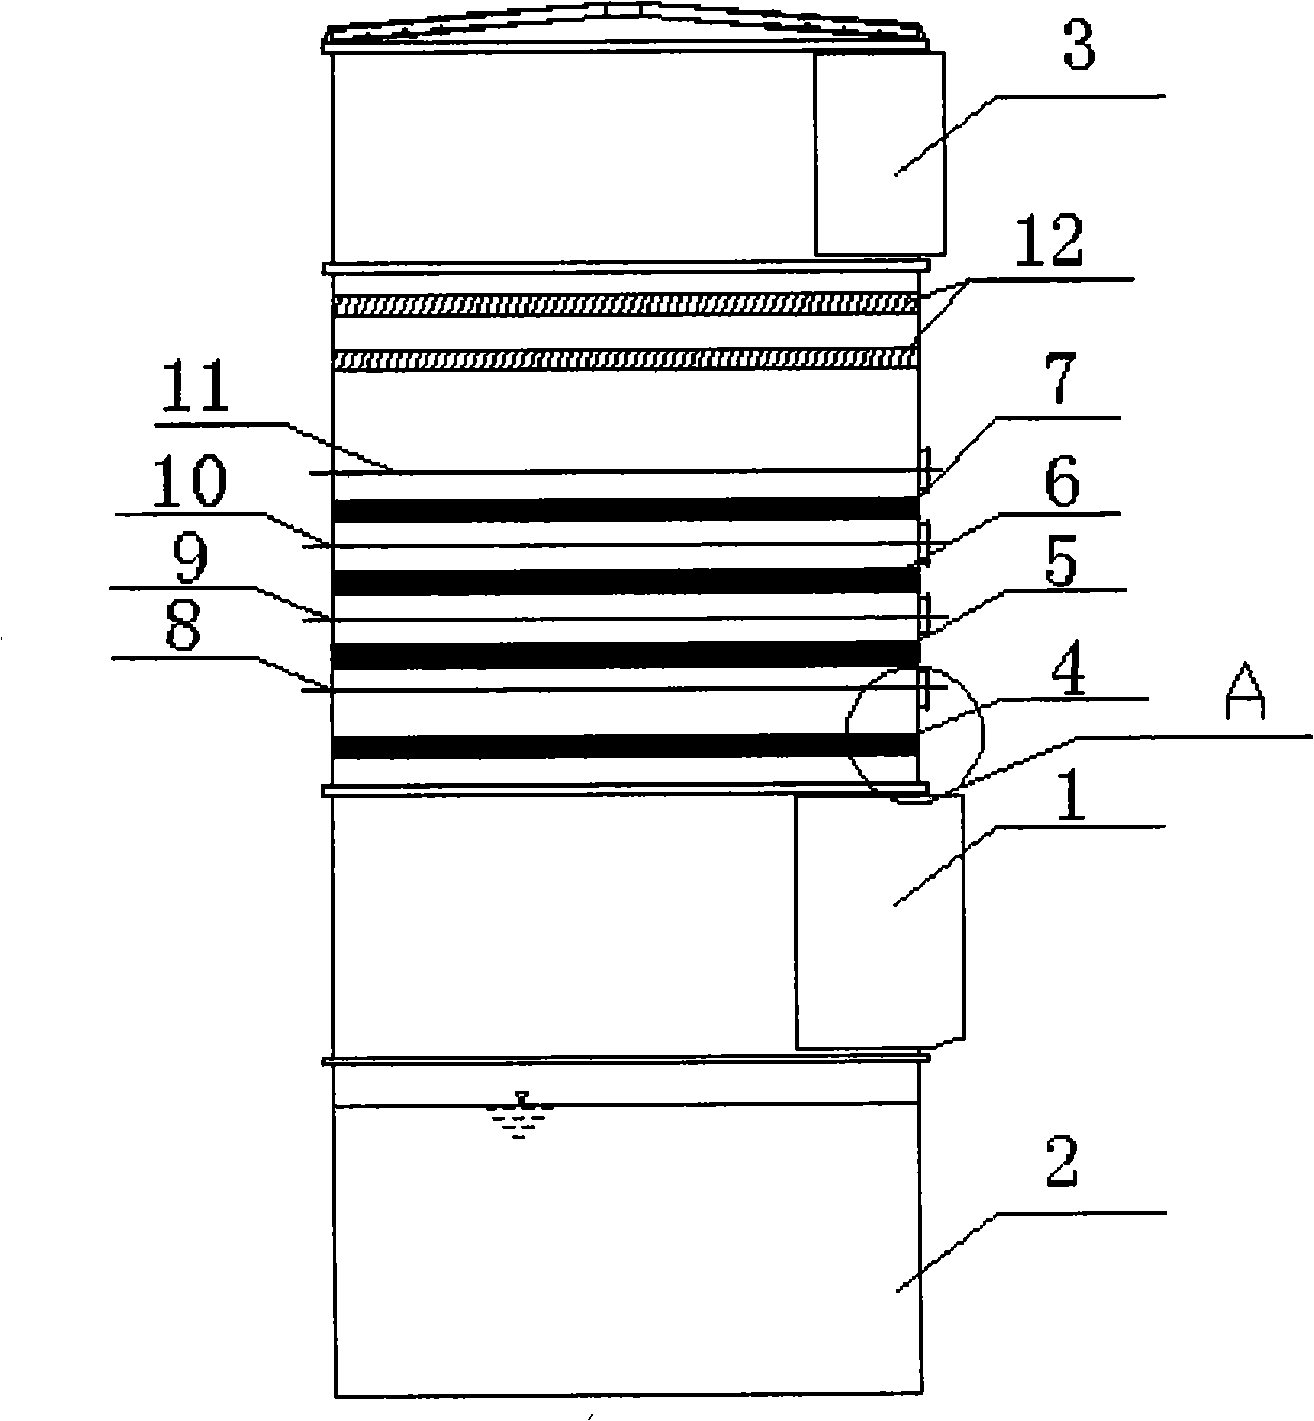 Spray tower for treating flue gas and gas gathering ring for the same